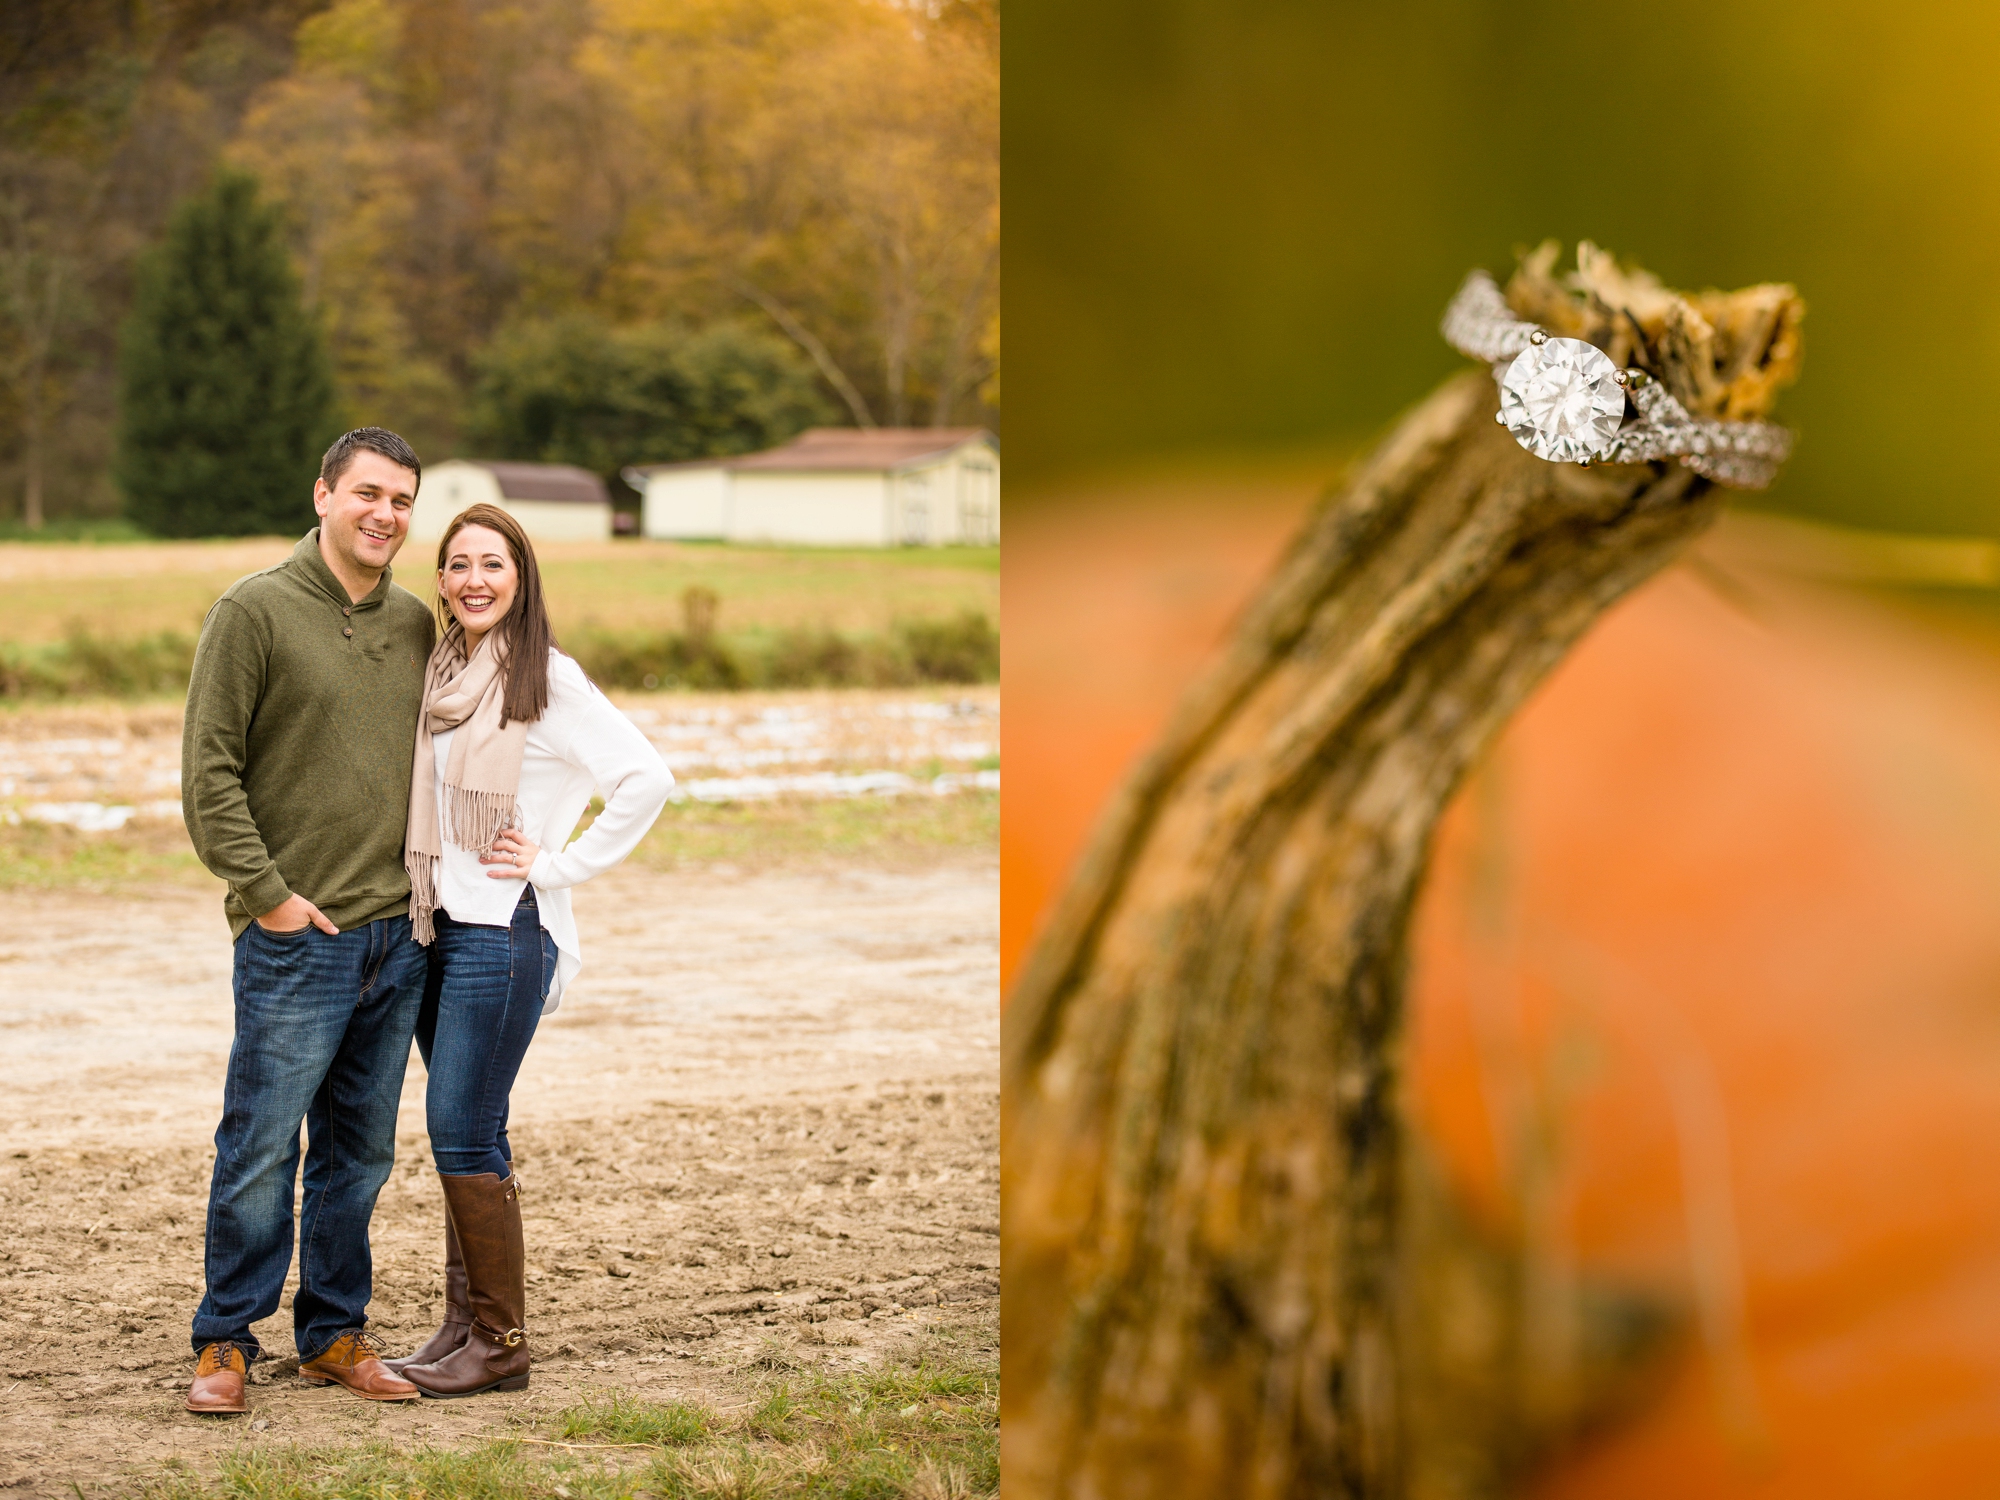 pittsburgh wedding photographer, indiana wedding photographer, best spot in pittsburgh for photo shoot, indiana pa engagement pictures, pittsburgh engagement photos